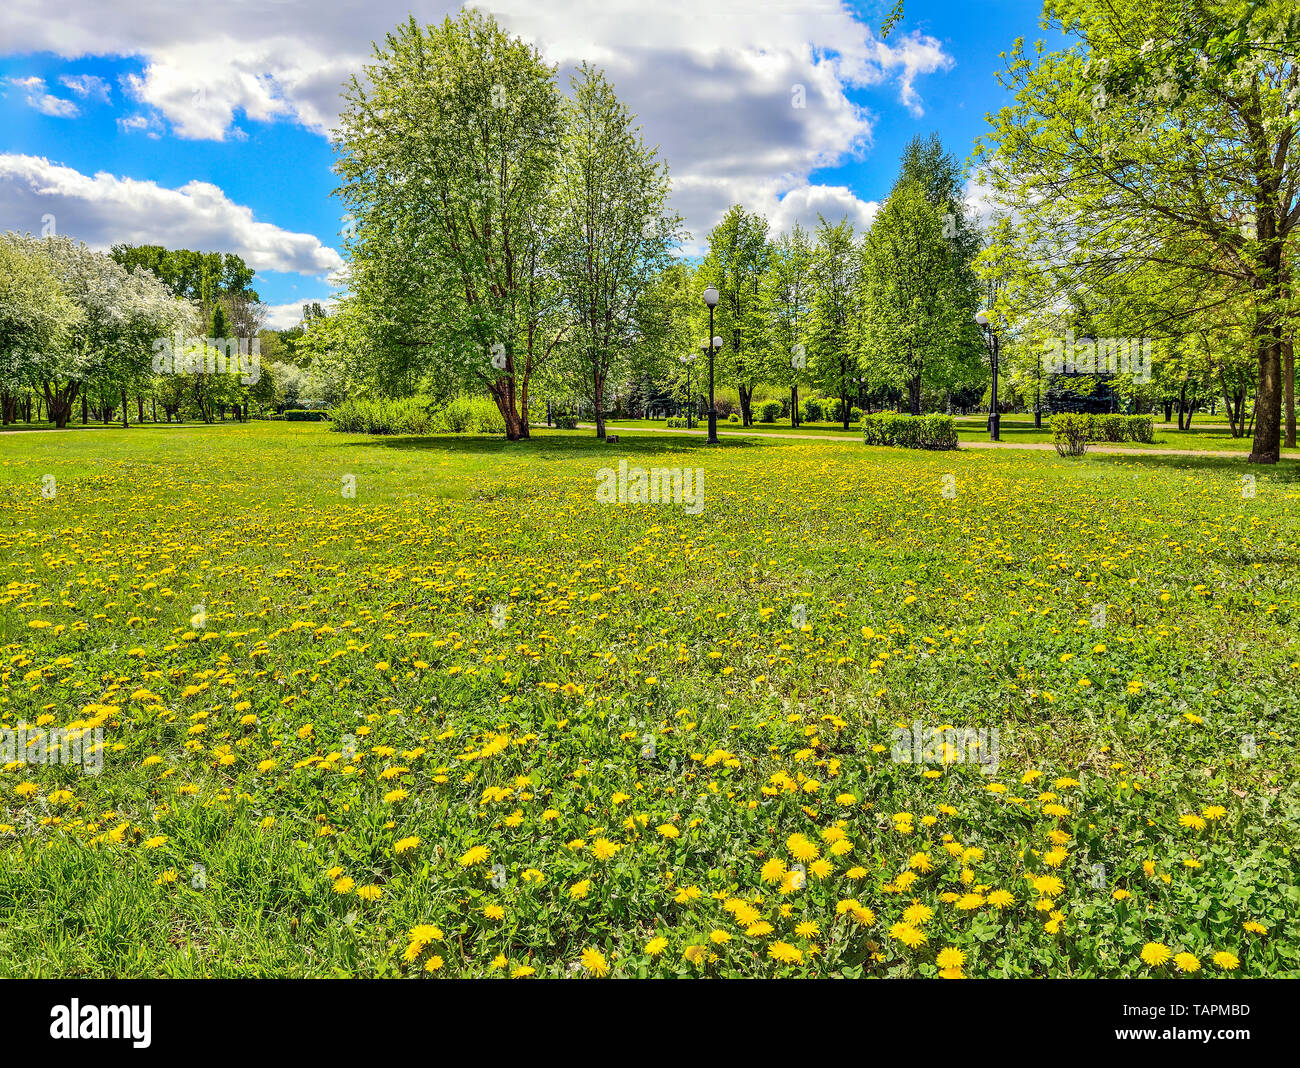 Beautiful romantic spring urban landscape in city park with blossoming trees, bright spring greenery and dandelions on lawn. Bright spring sunny day Stock Photo